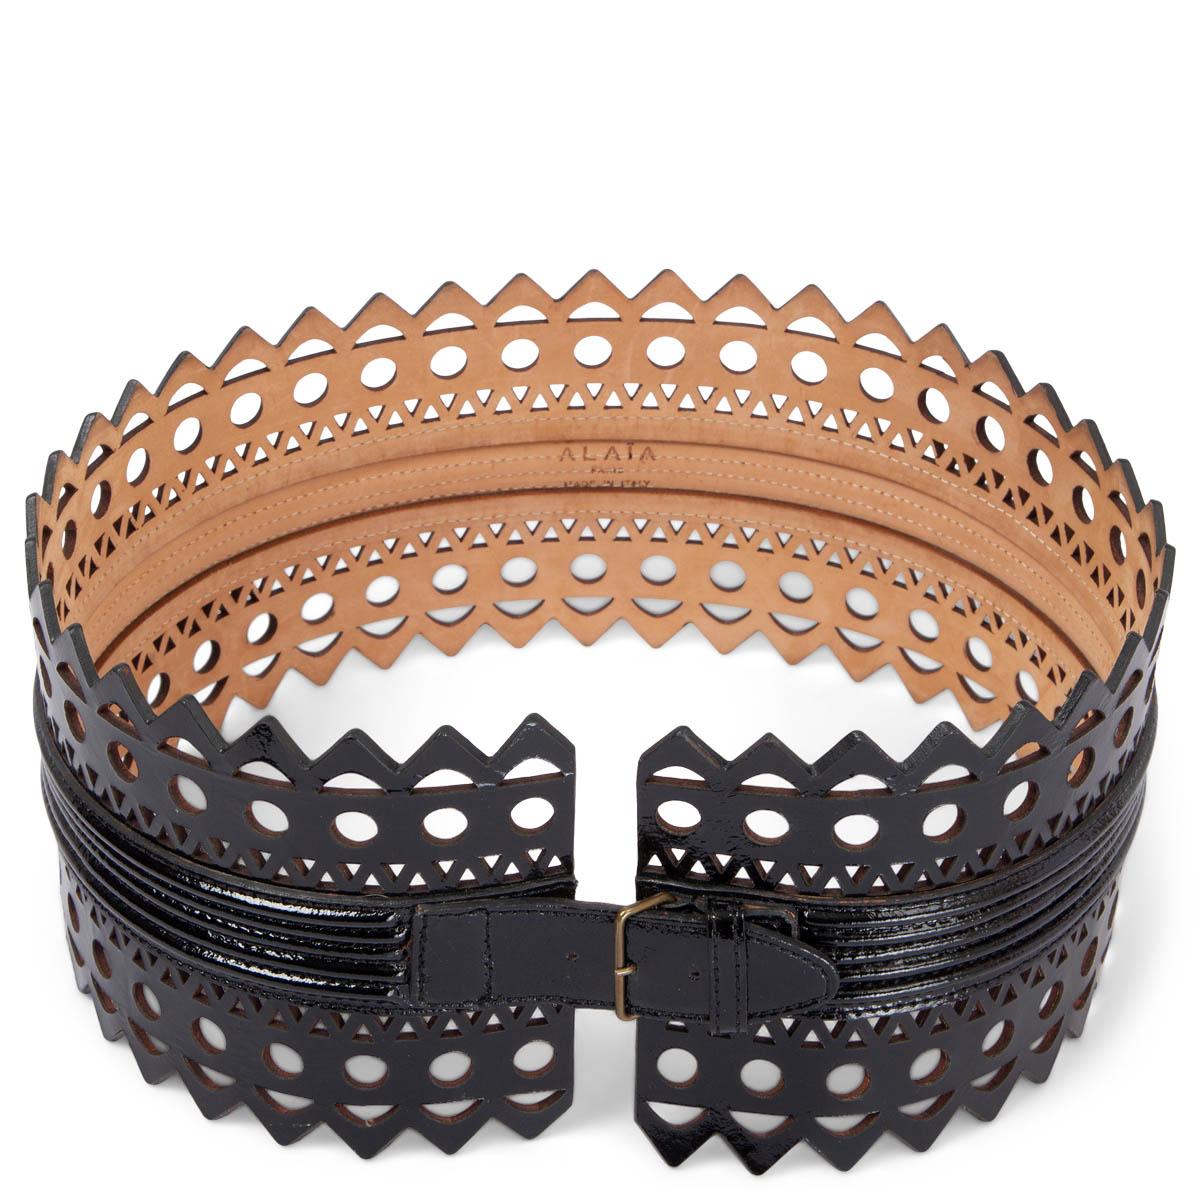 100% authentic Alaïa 'Vienne Wave' perforated laser-cut waist belt in black patent-leather with one buckle closure in the middle. Has been worn and is in excellent condition. 

Measurements
Size	80
Width	12cm (4.7in)
Fits	77cm (30in) to 80cm